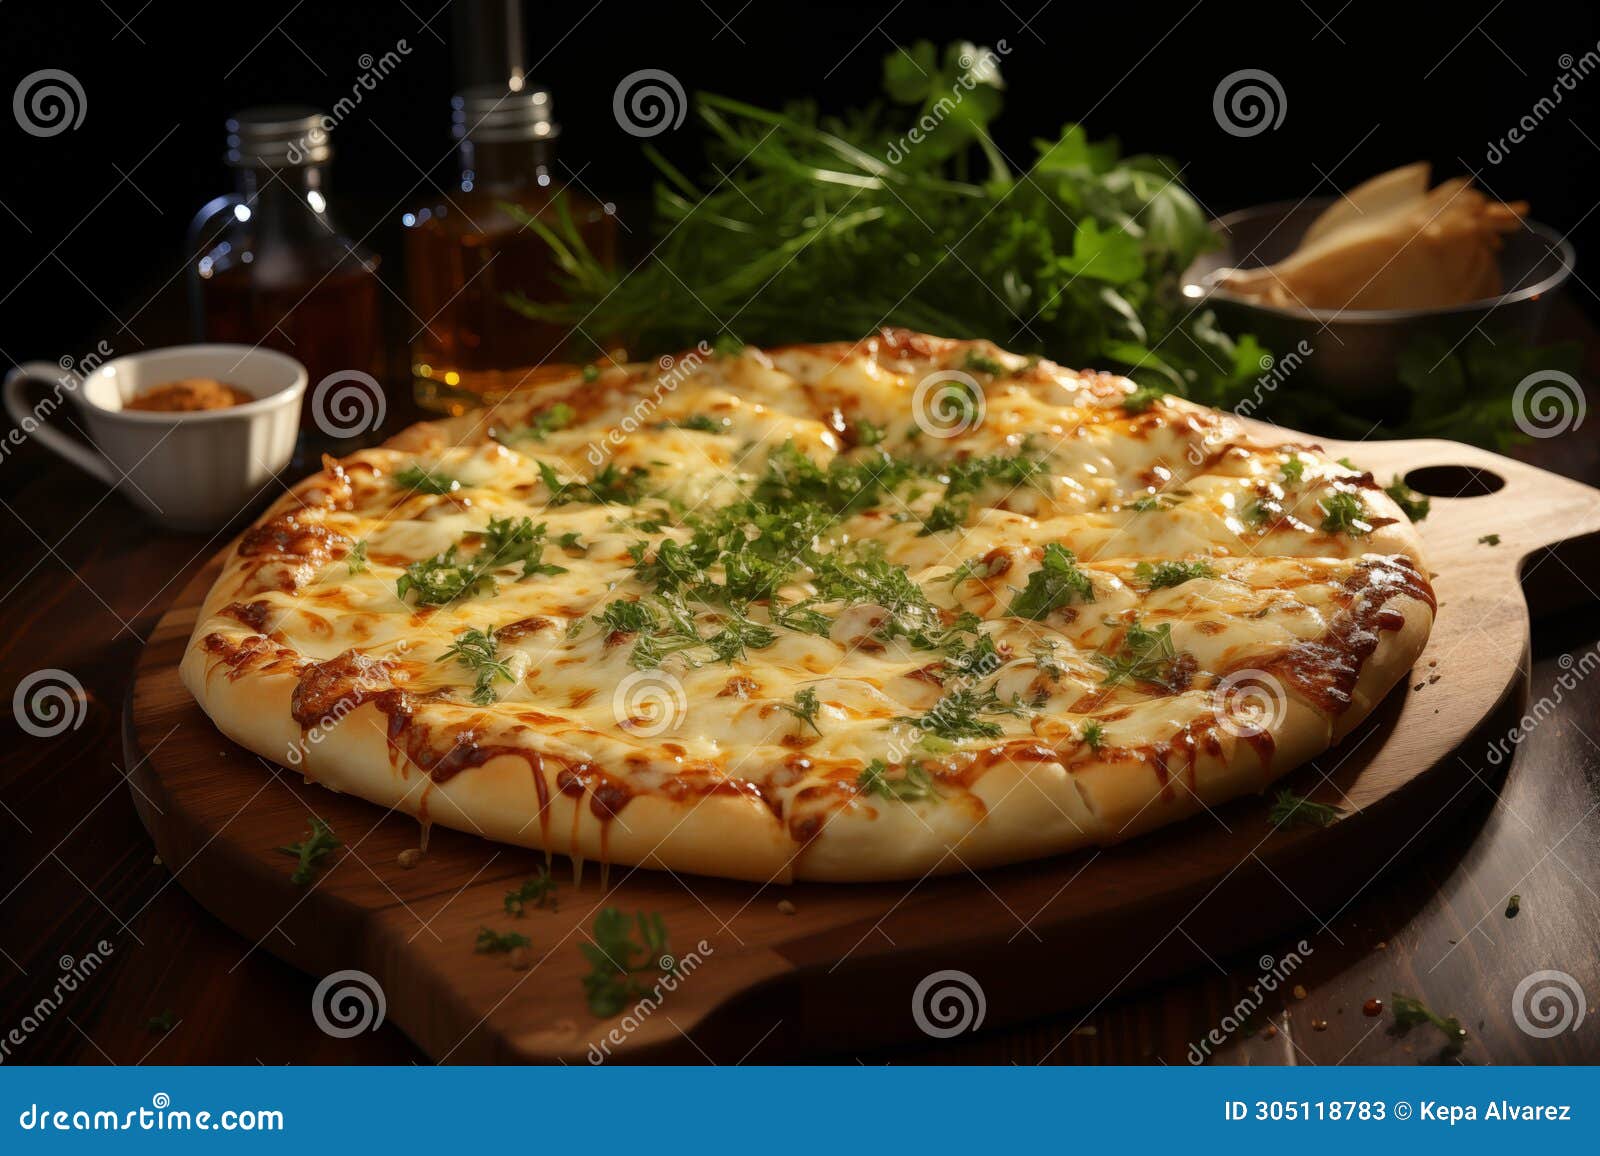 delicious four cheese pizza on a round wooden board